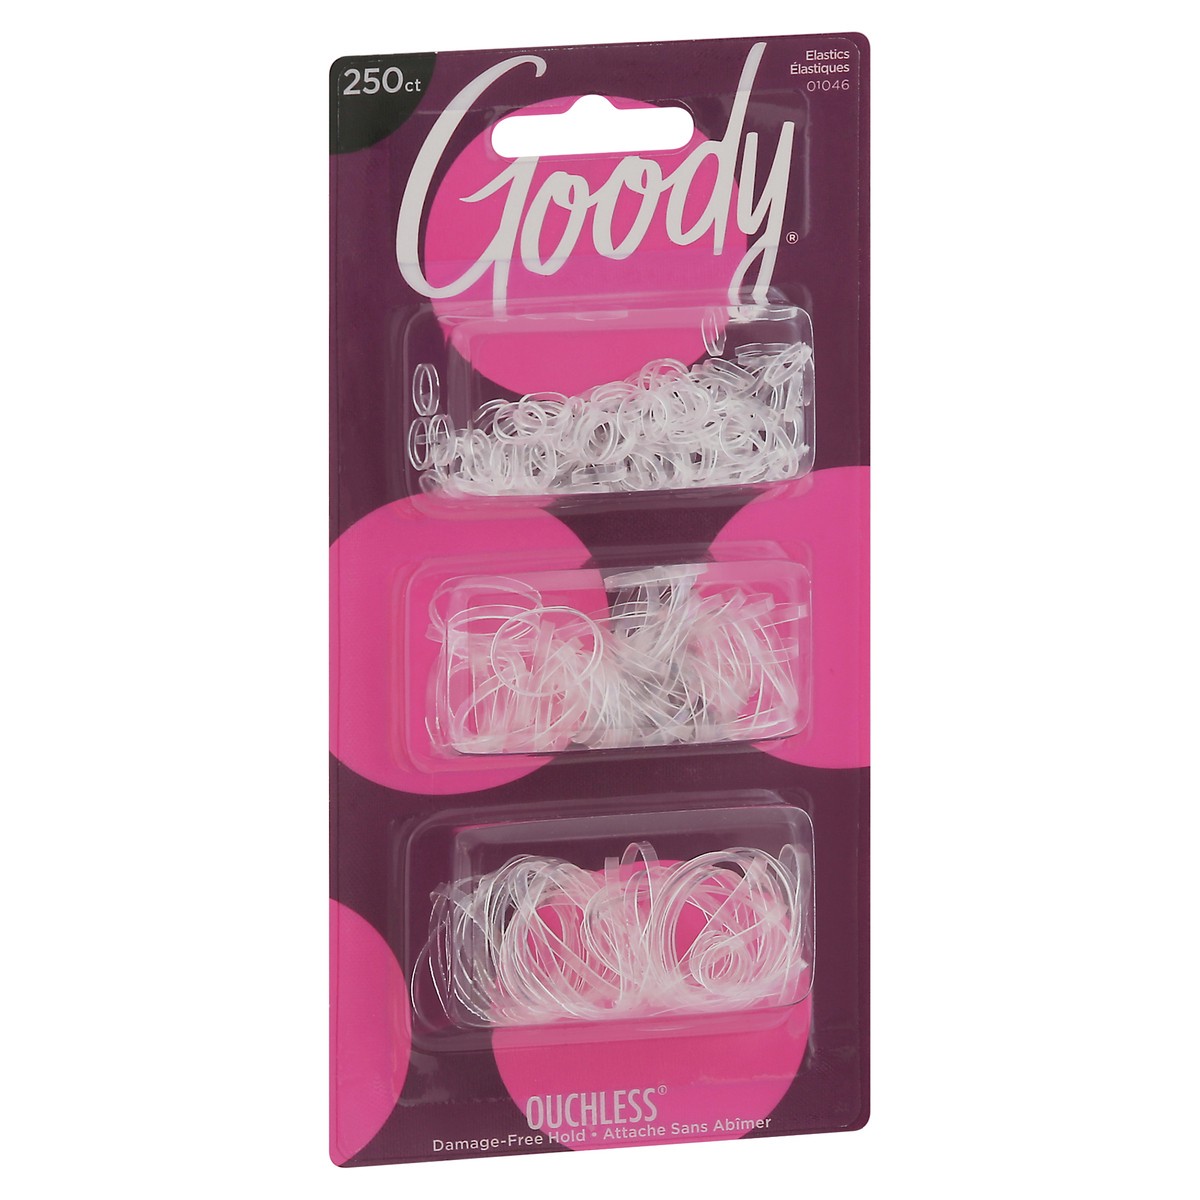 slide 2 of 9, Goody Ouchless Elastics 250 ea, 250 ct